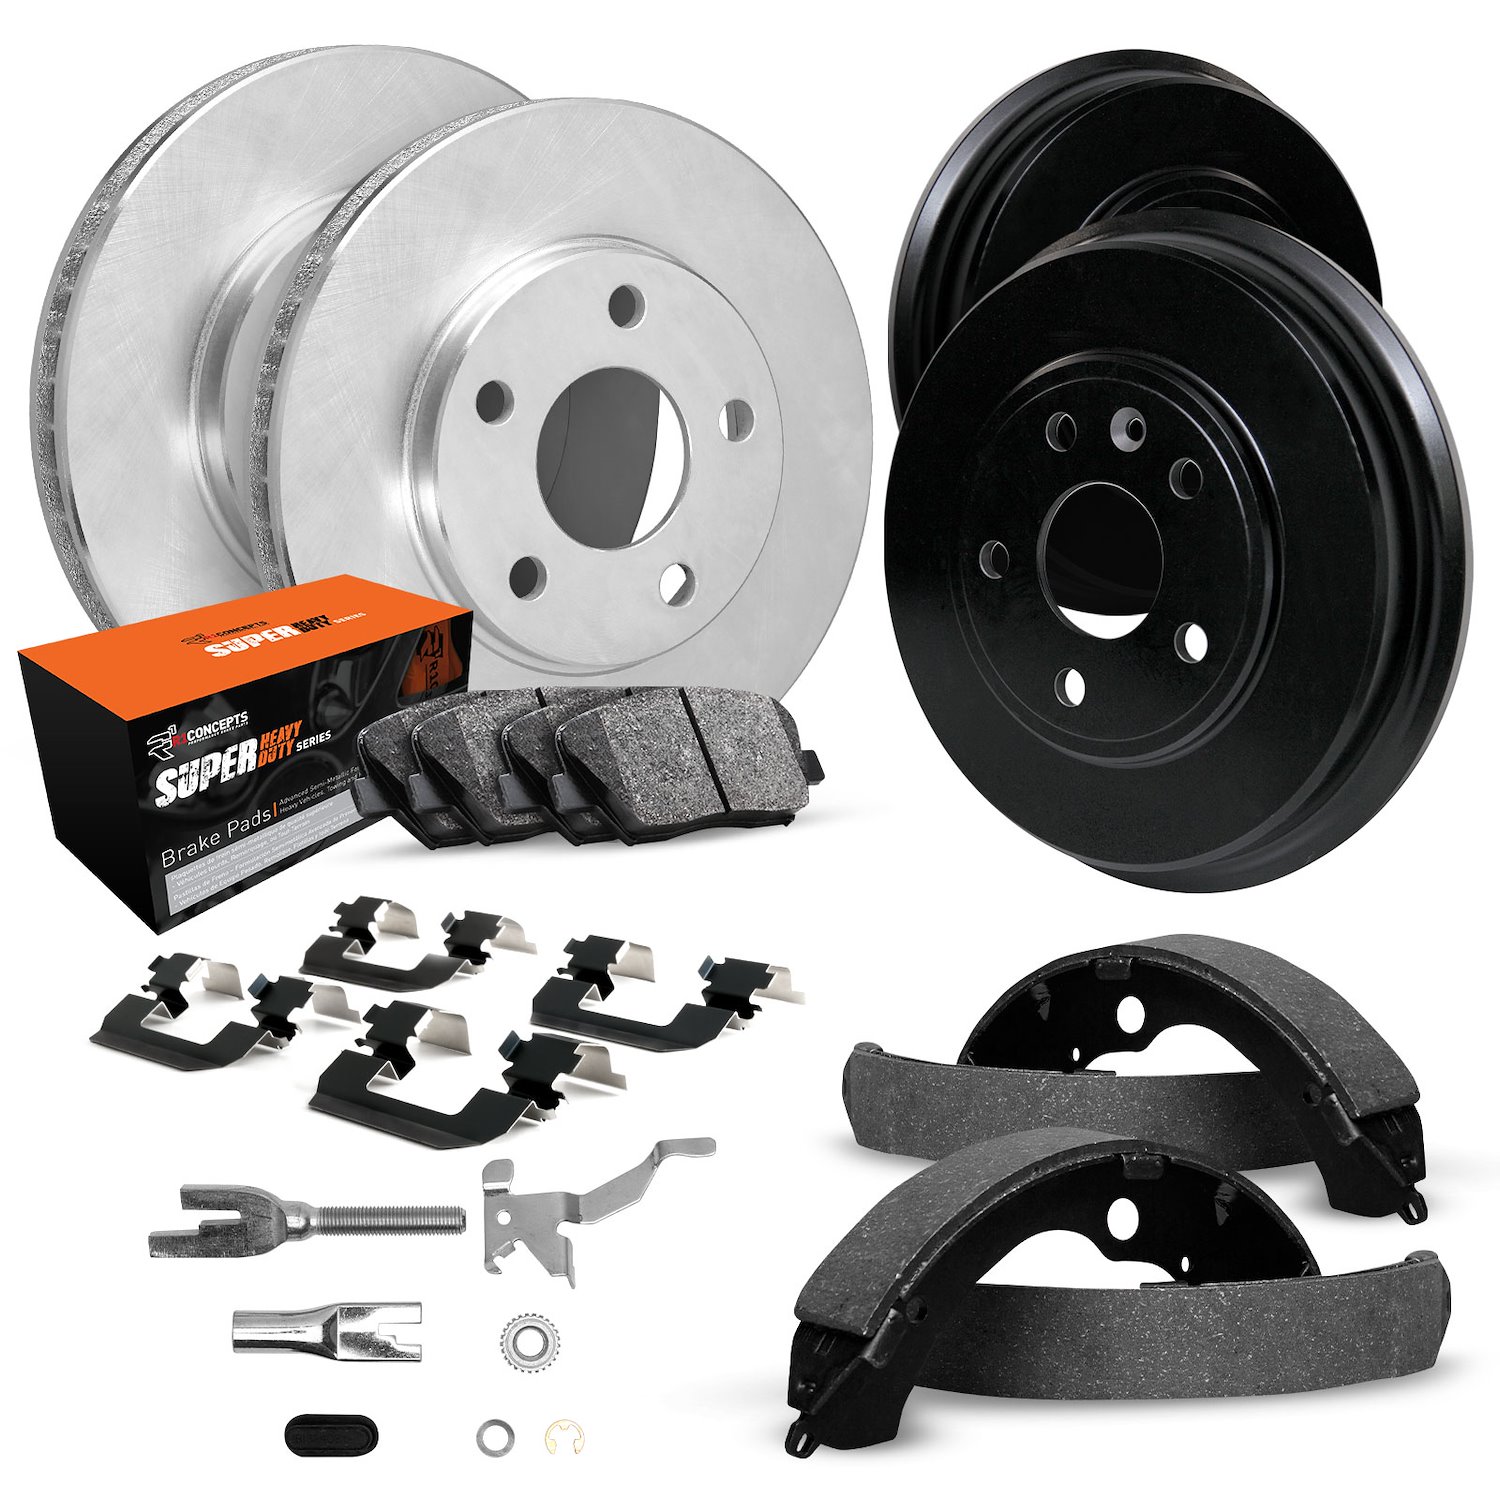 E-Line Blank Brake Rotor & Drum Set w/Super-Duty Pads, Shoes, Hardware, & Adjusters, 1974-1974 Ford/Lincoln/Mercury/Mazda